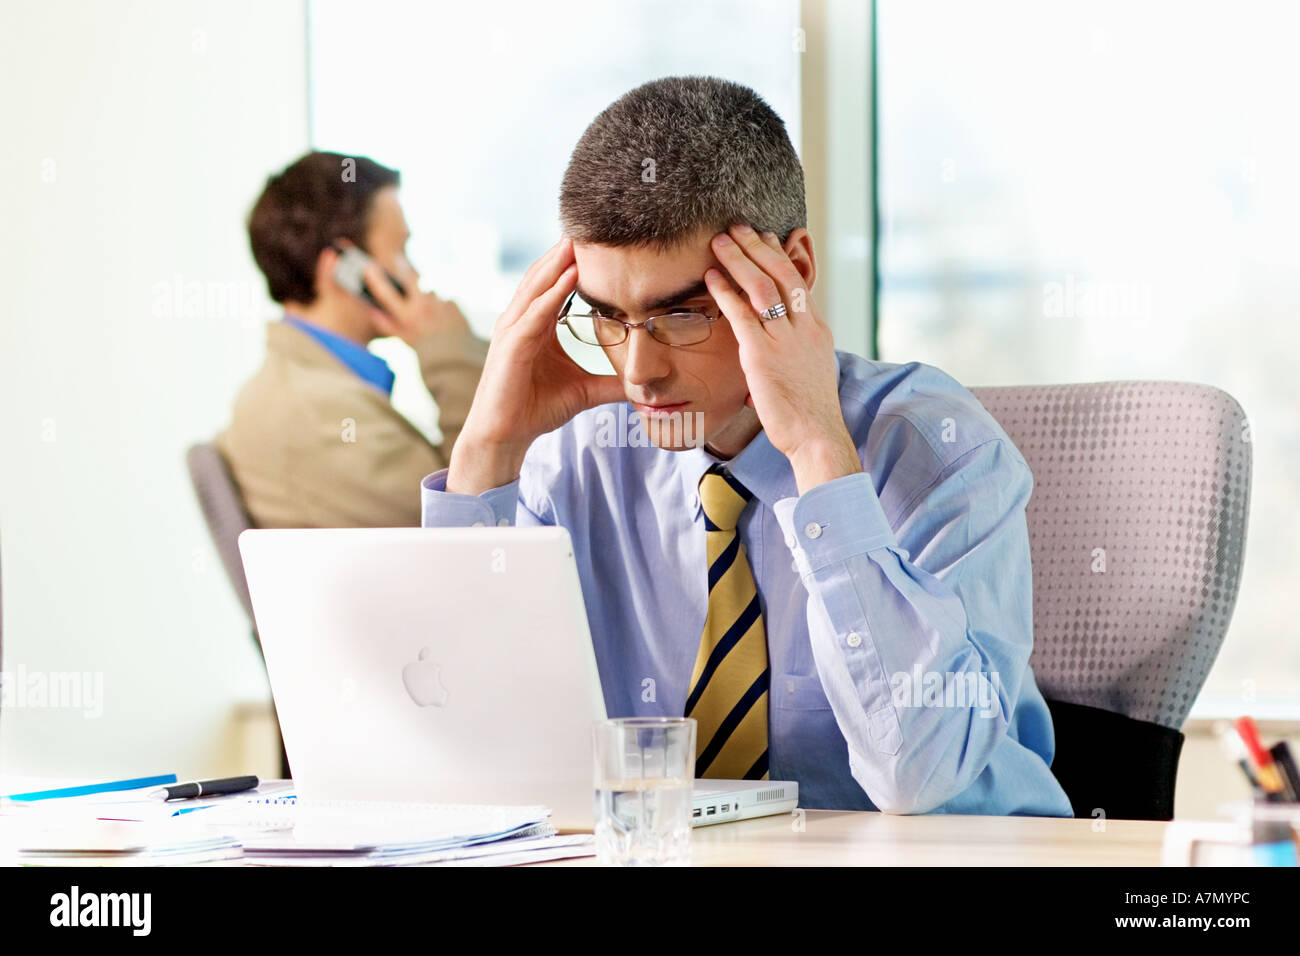 Two men in the office. Stock Photo